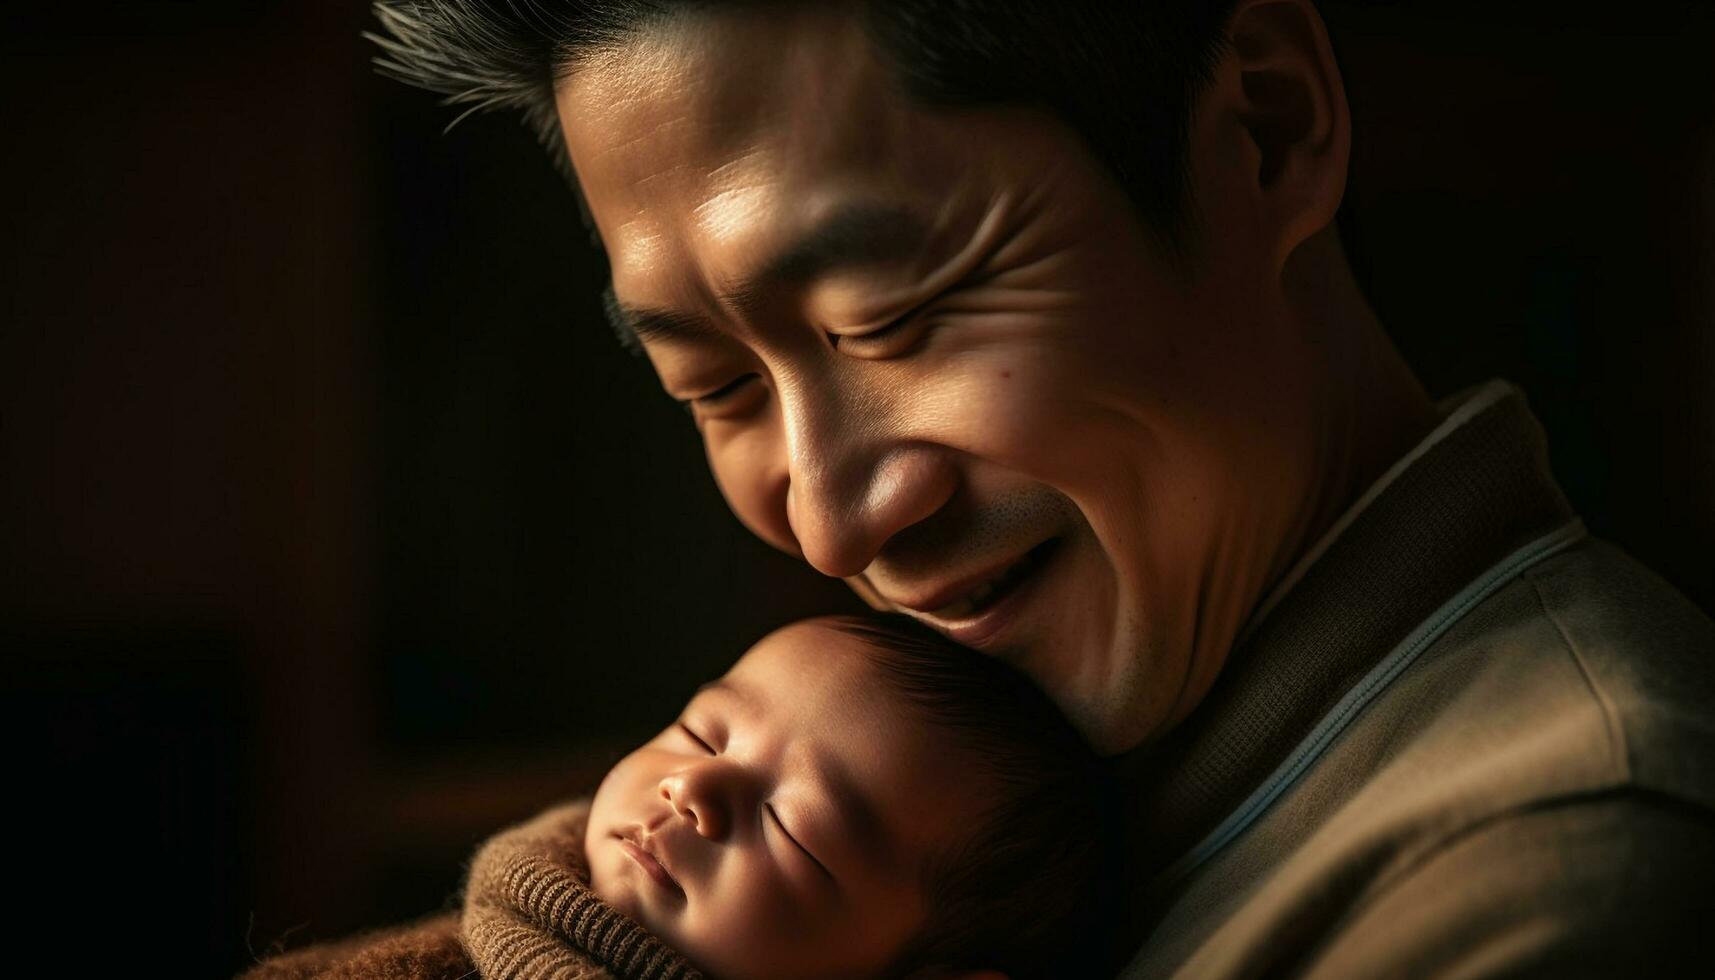 Father embracing newborn son, a portrait of love and bonding generated by AI photo